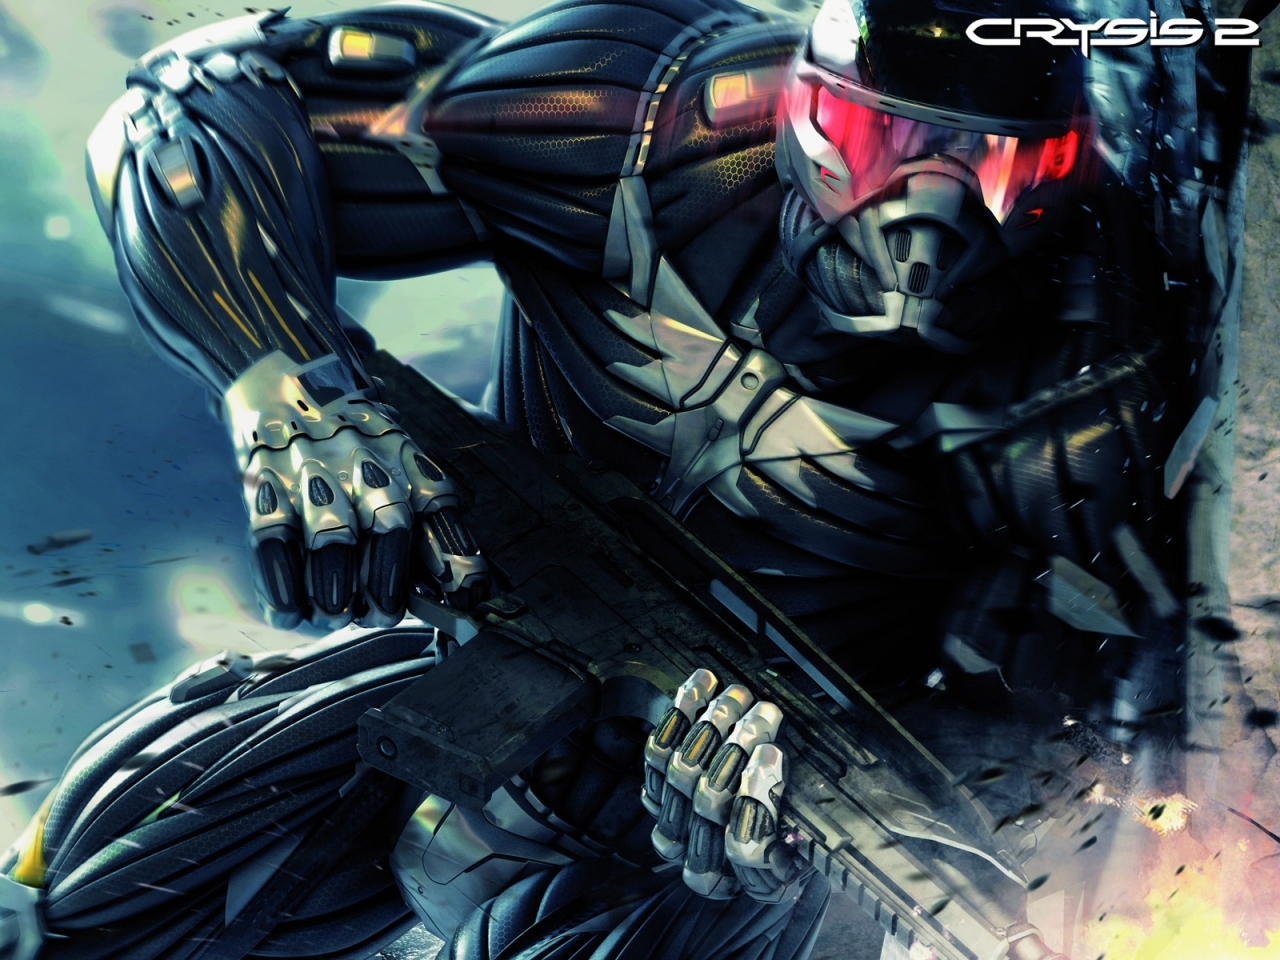 Crysis 2 for 1280 x 960 resolution